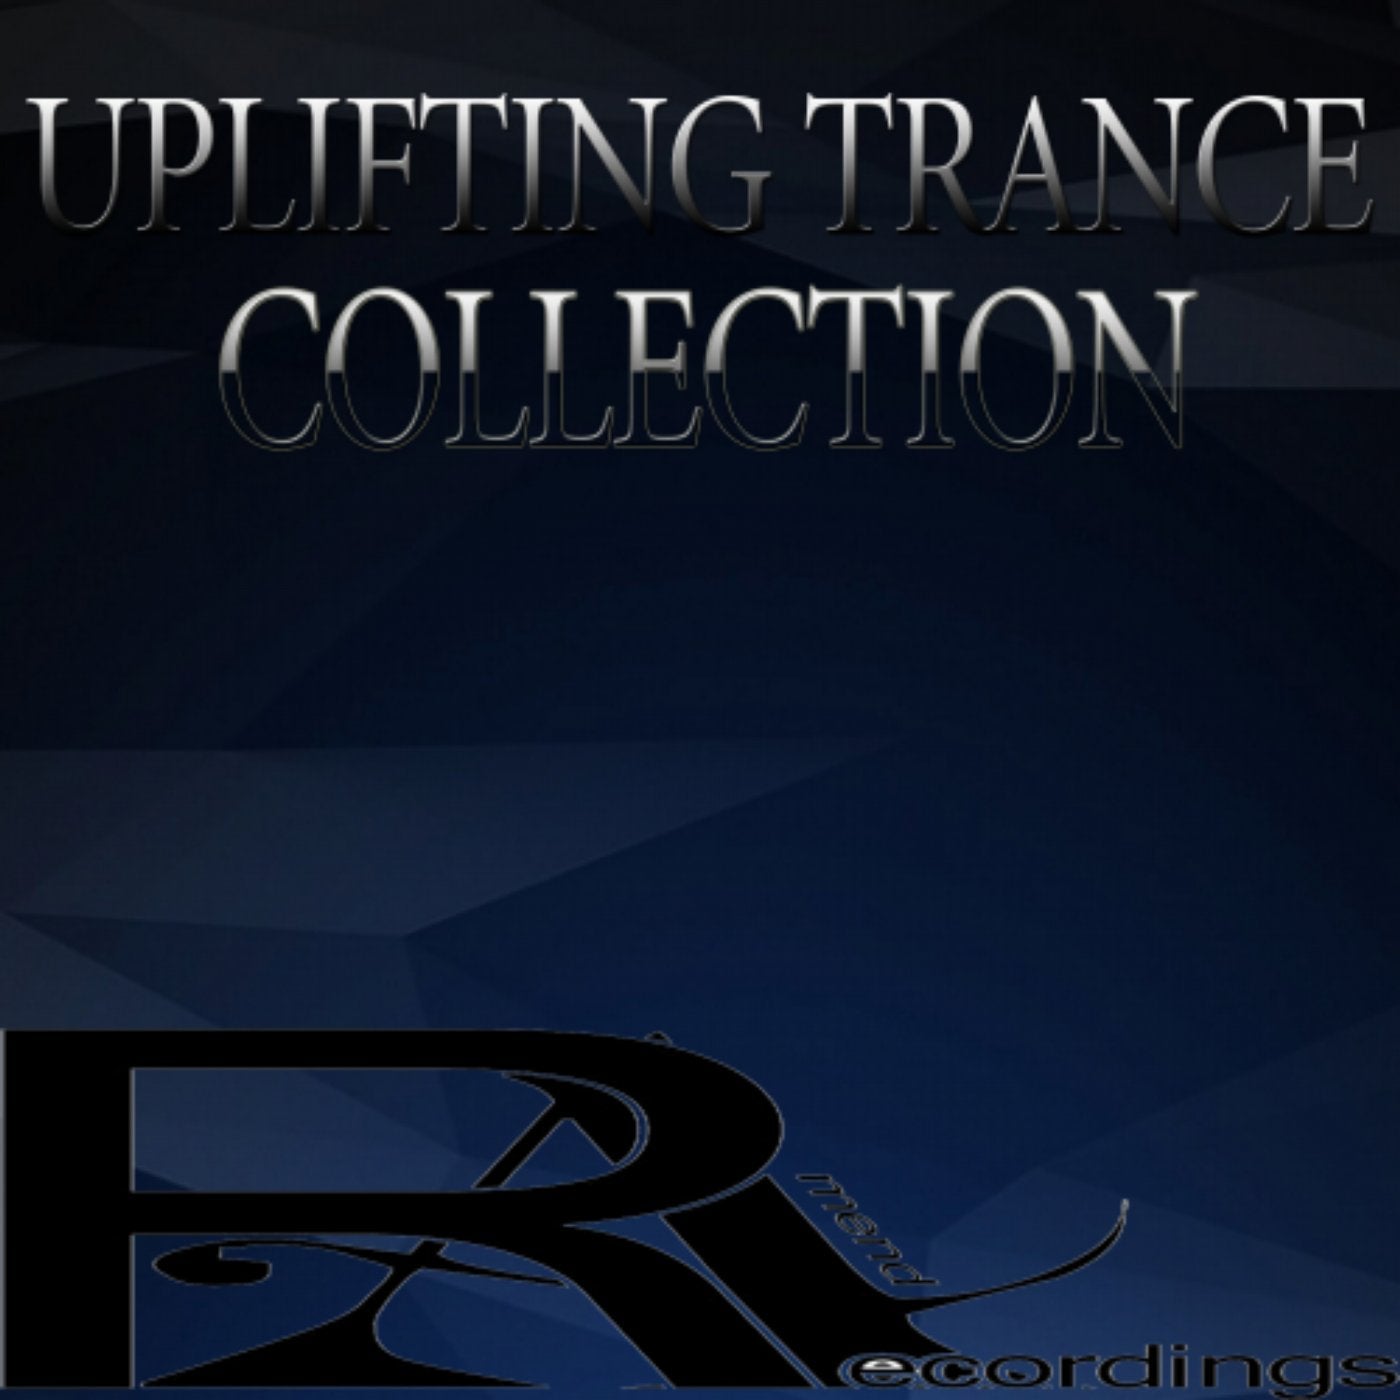 UPLIFTING TRANCE COLLECTION